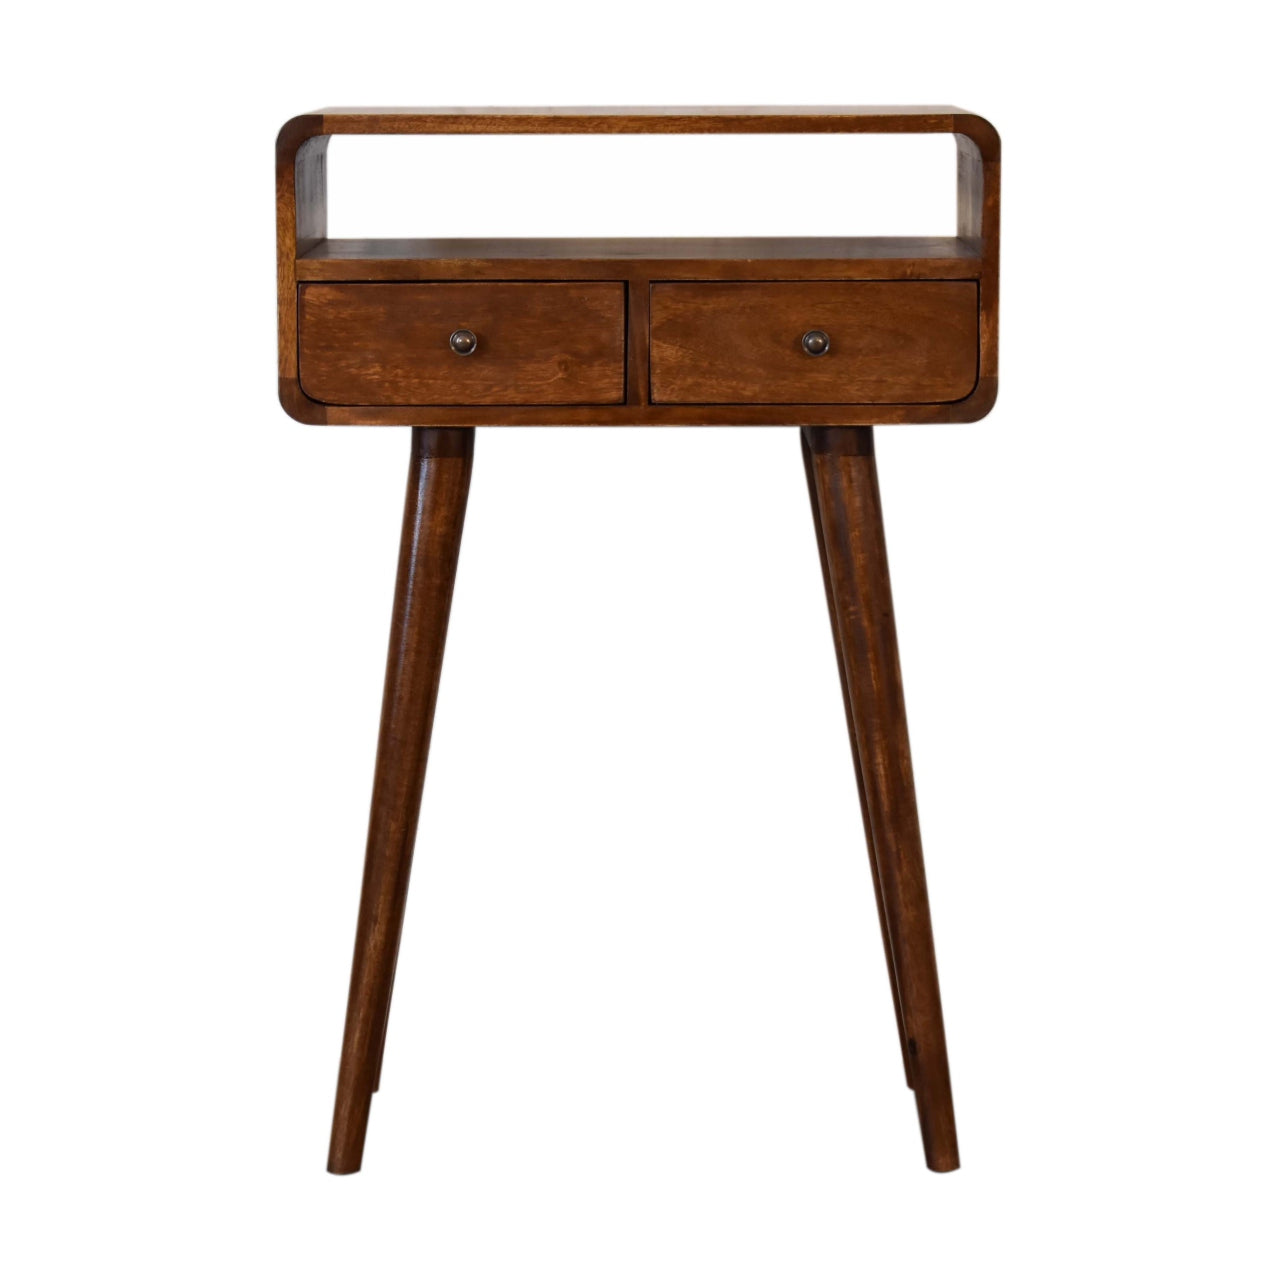 View Mini Chestnut Console Table information